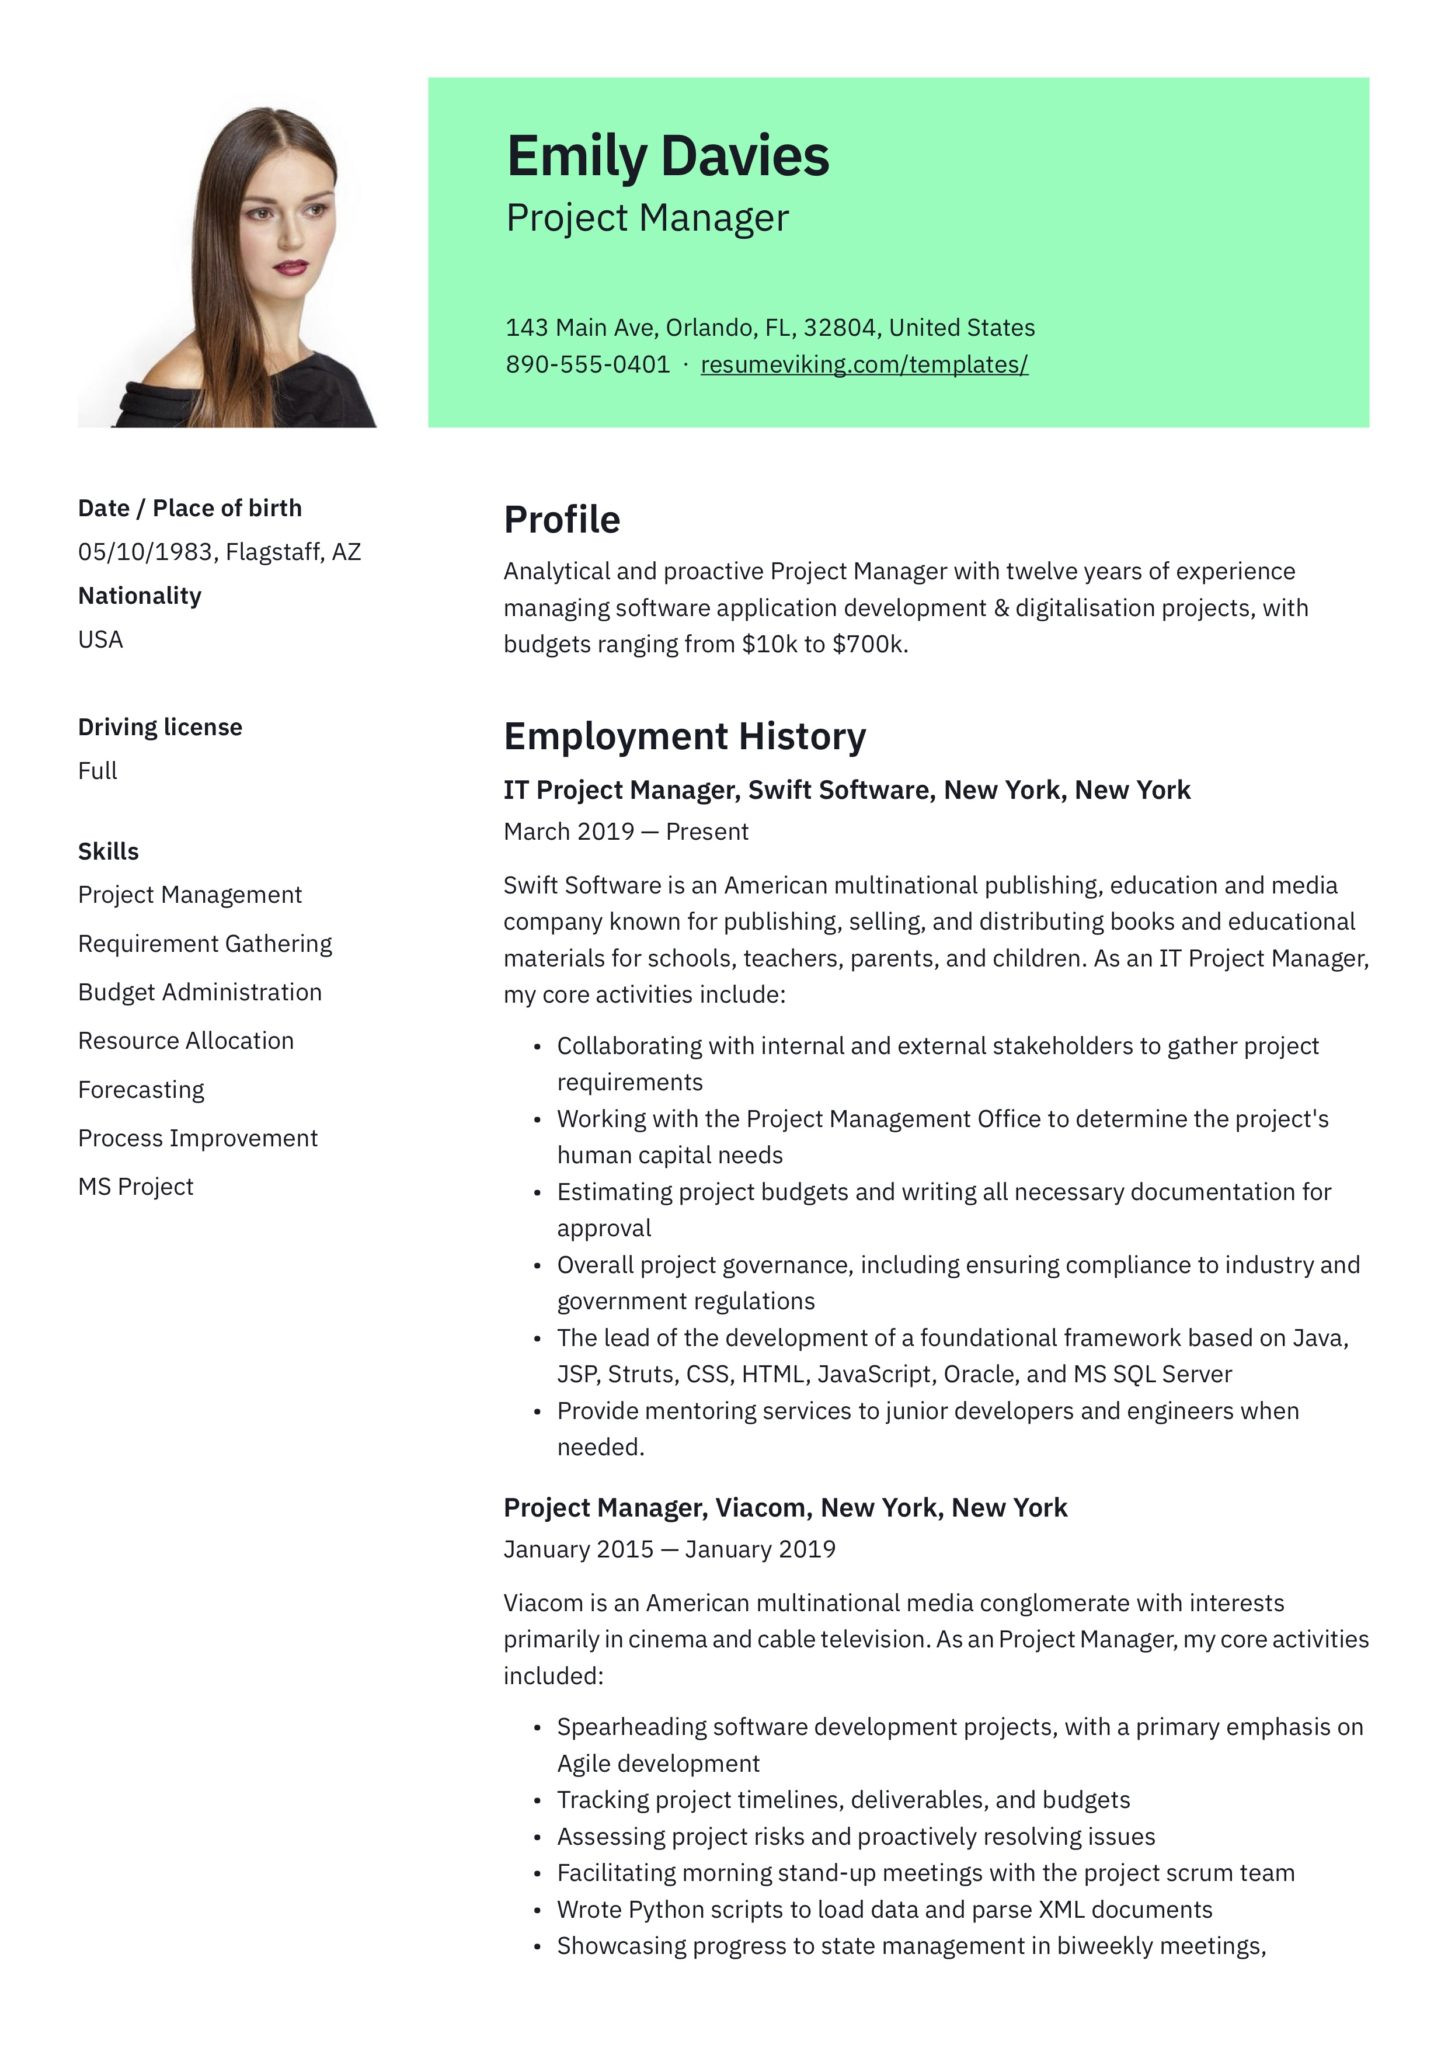 Sample Resume for Project Manager It software India 20 Project Manager Resume Examples & Full Guide Pdf & Word 2021